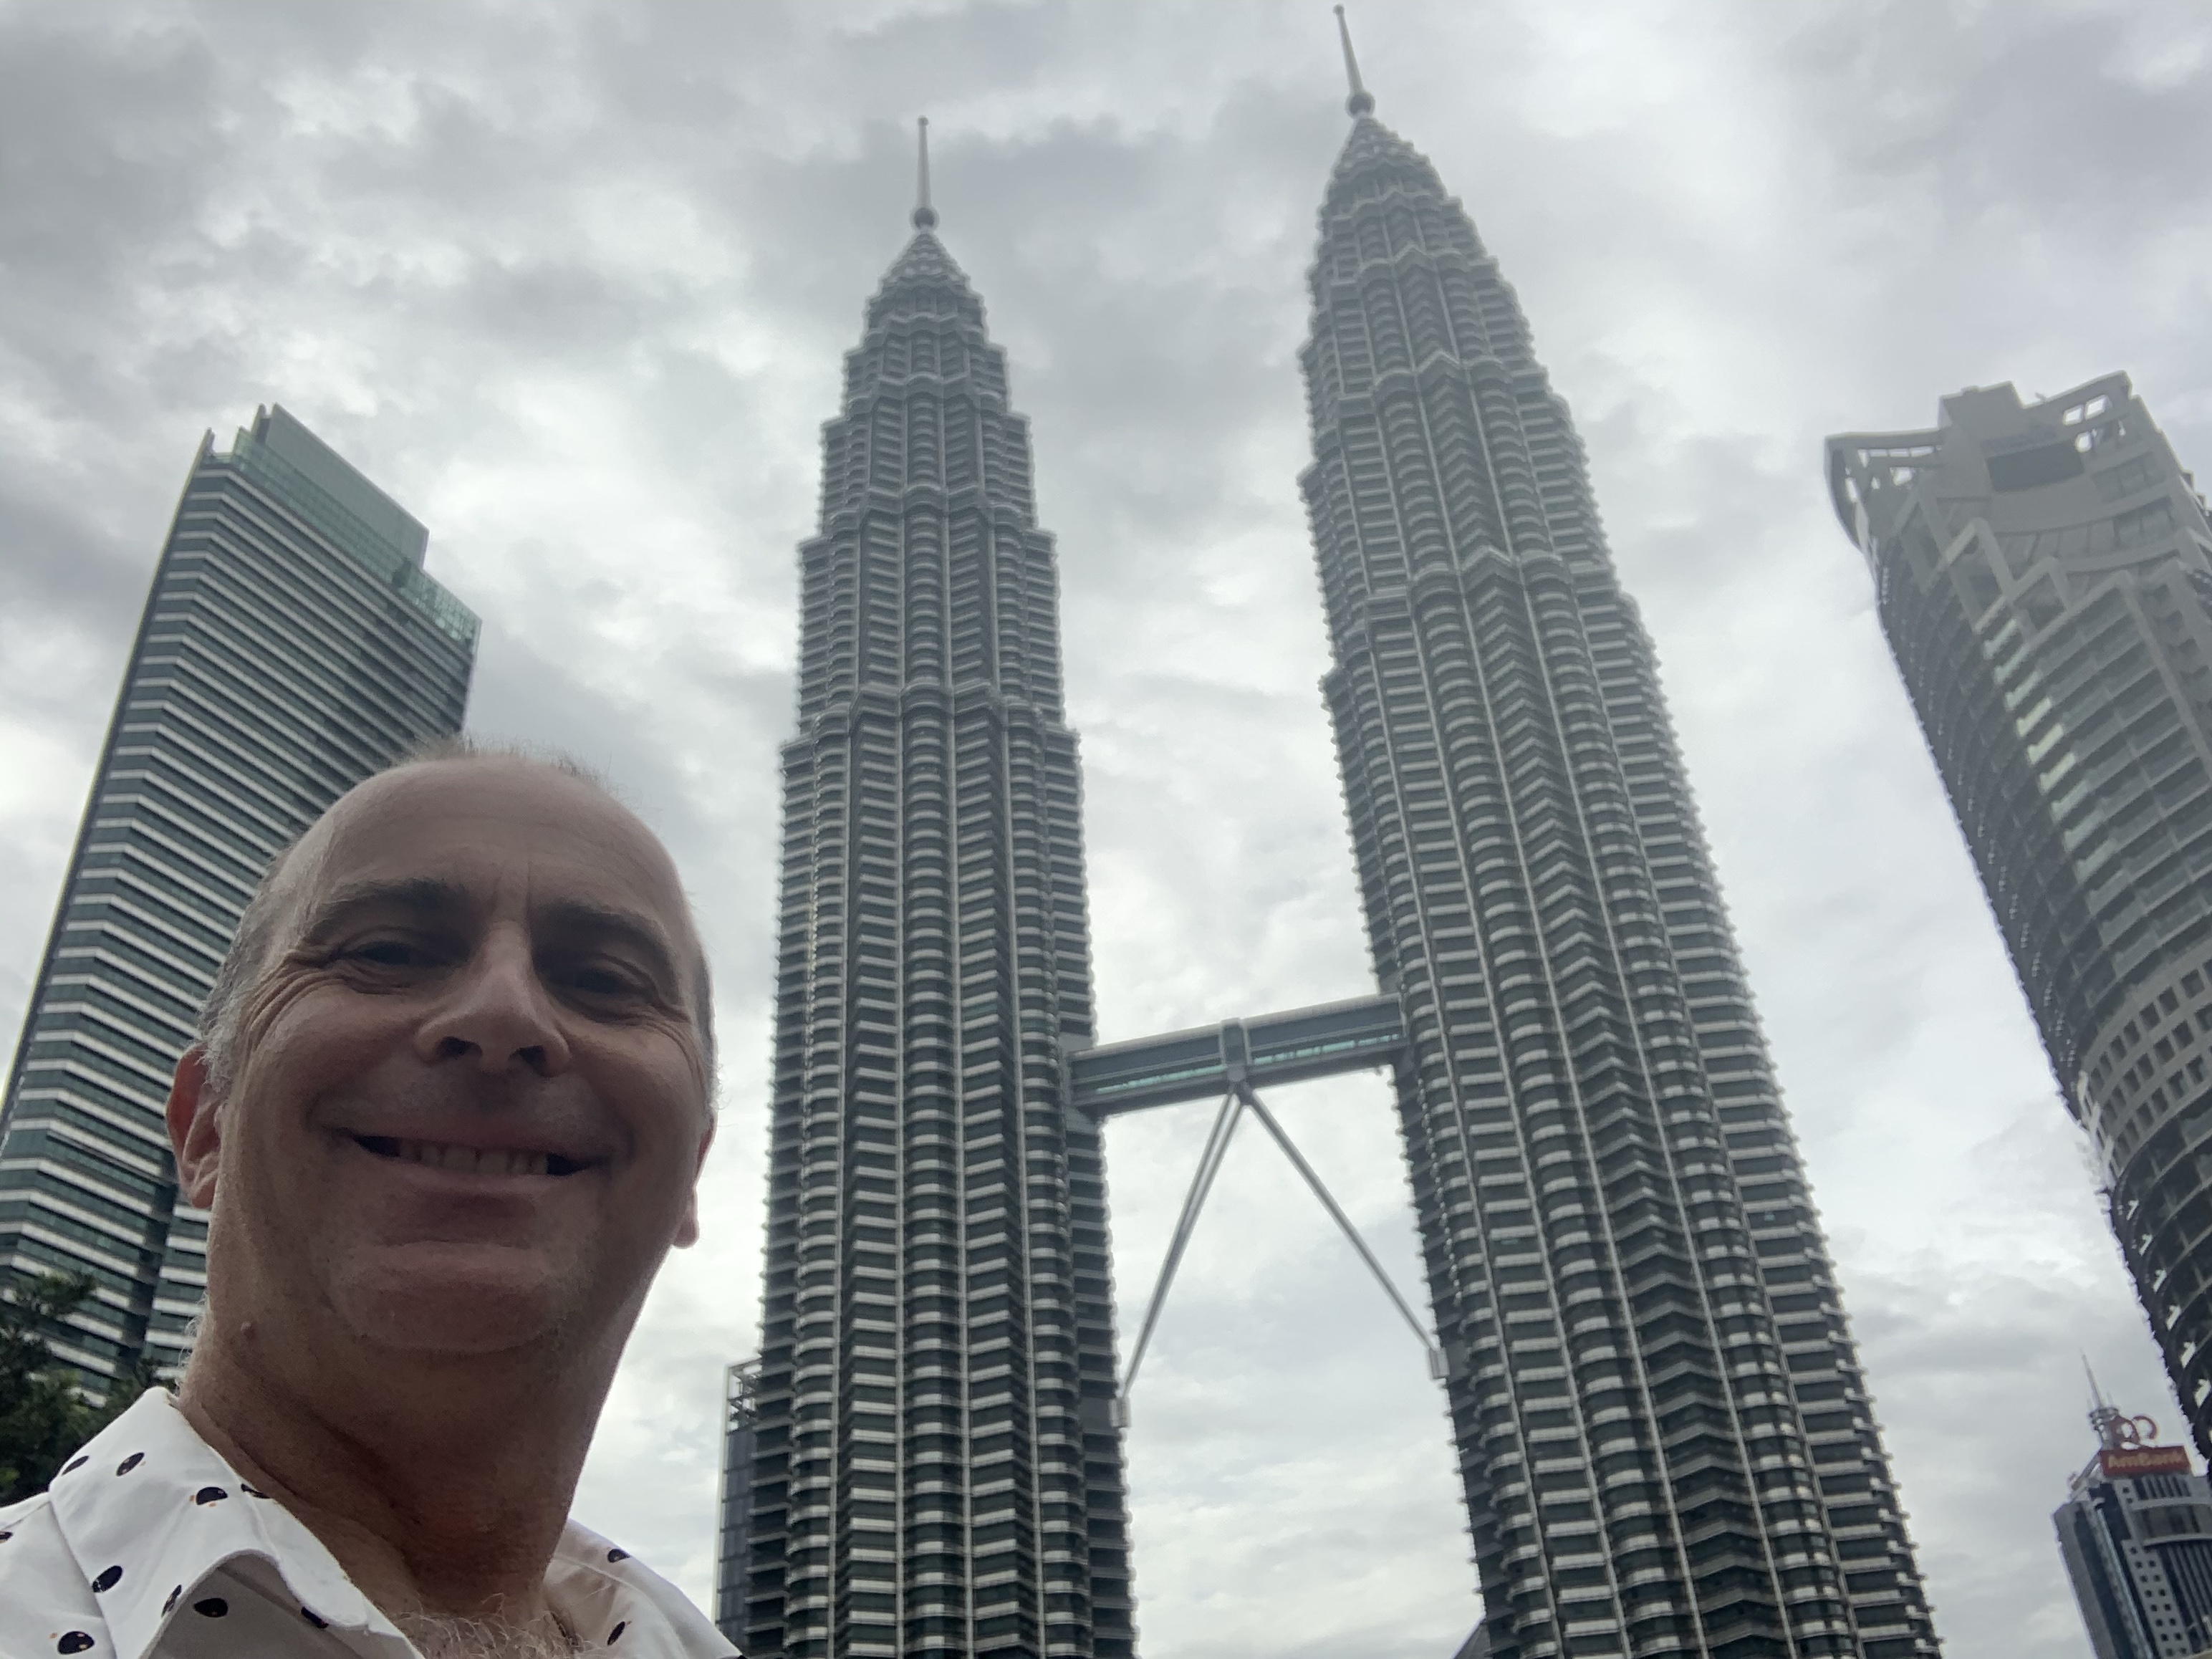 a man taking a selfie in front of two tall buildings